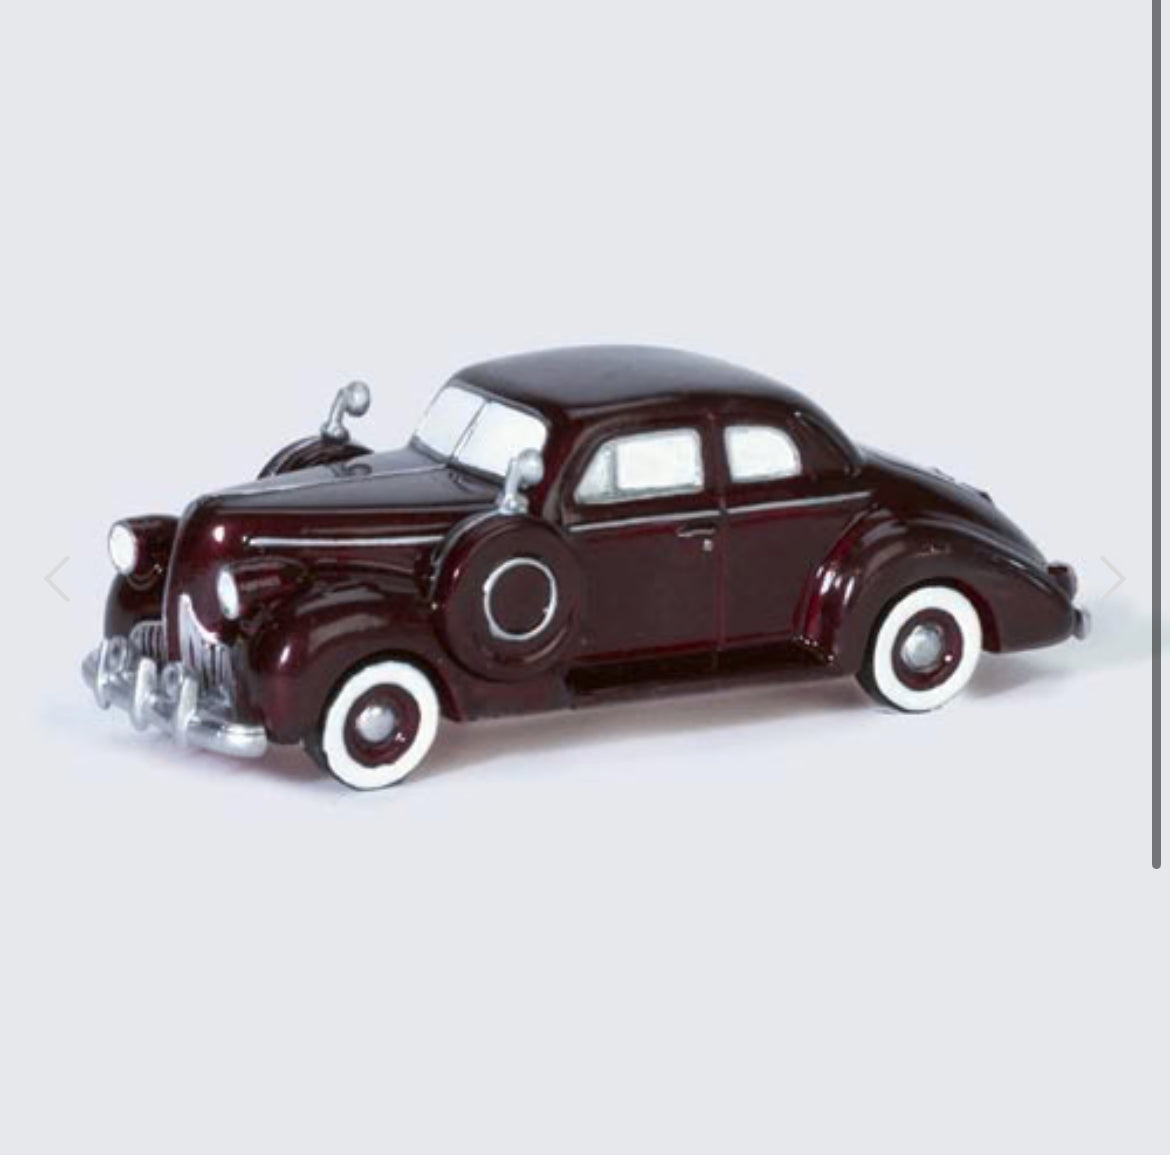 Department 56 - Classic Cars - 1939 Buick Roadster